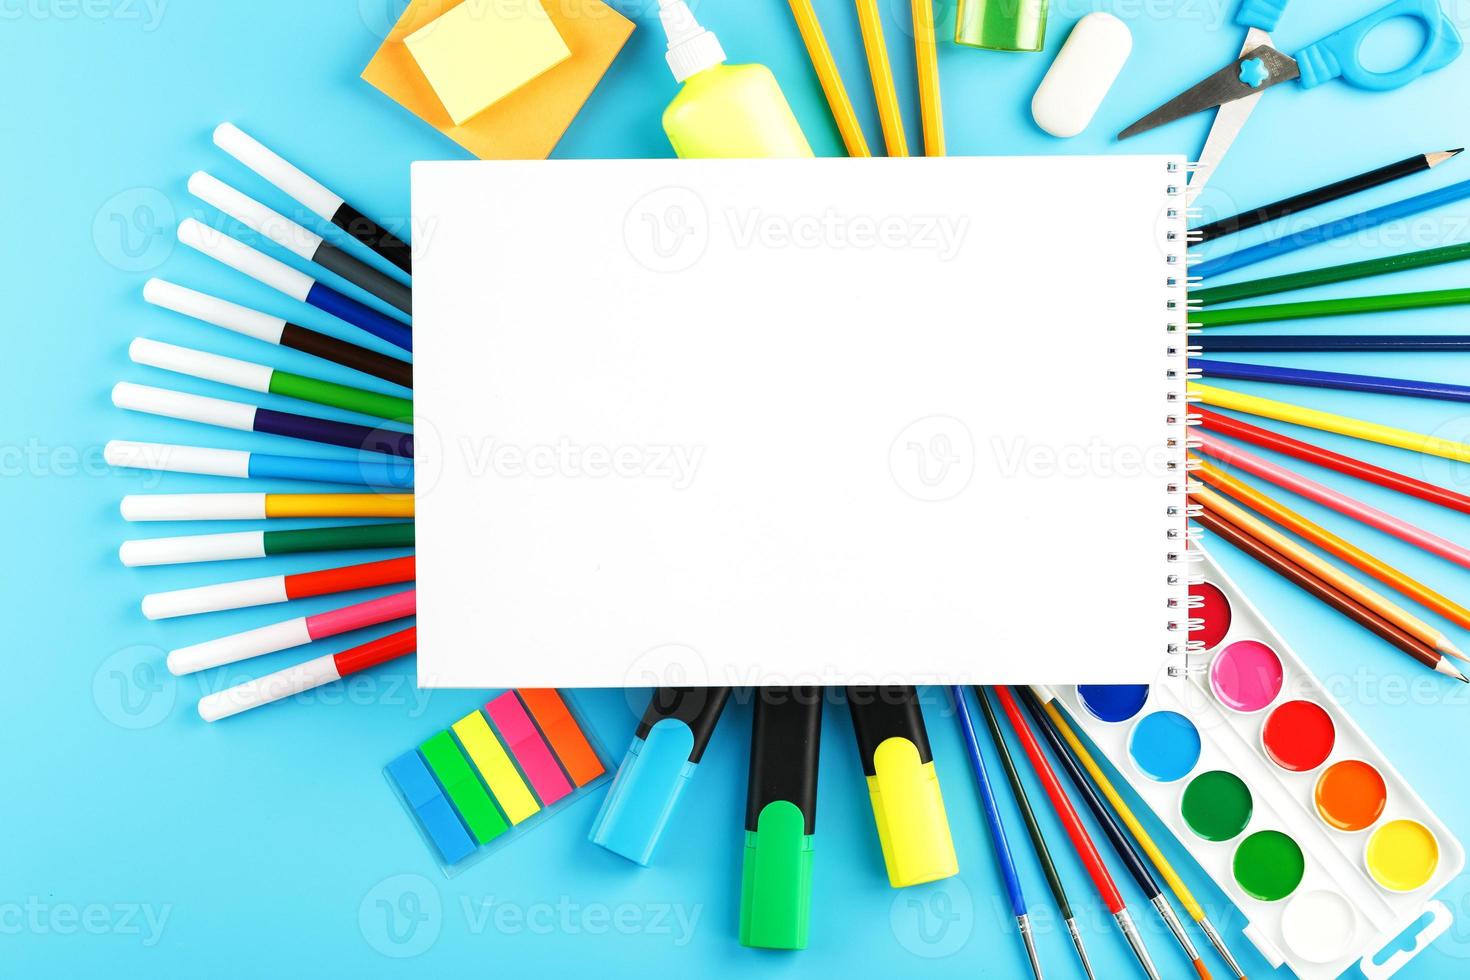 A set of school supplies for learning and creative development on a blue background. photo